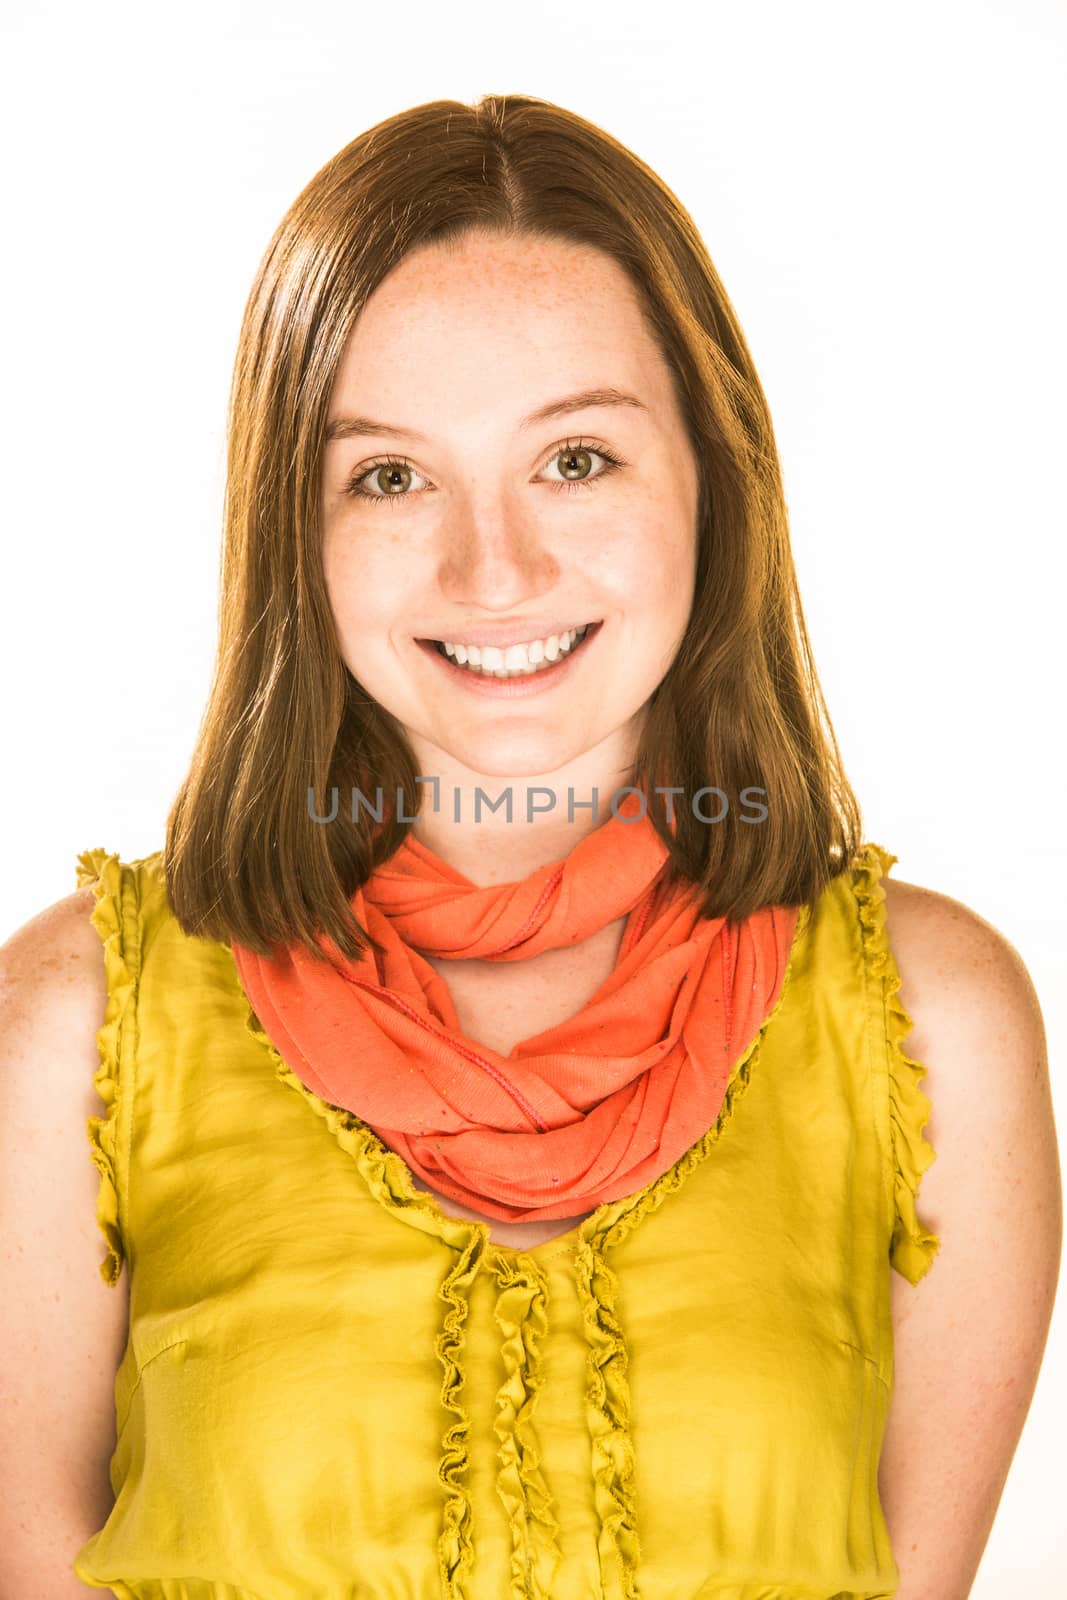 Pretty girl with a friendly expression on white background